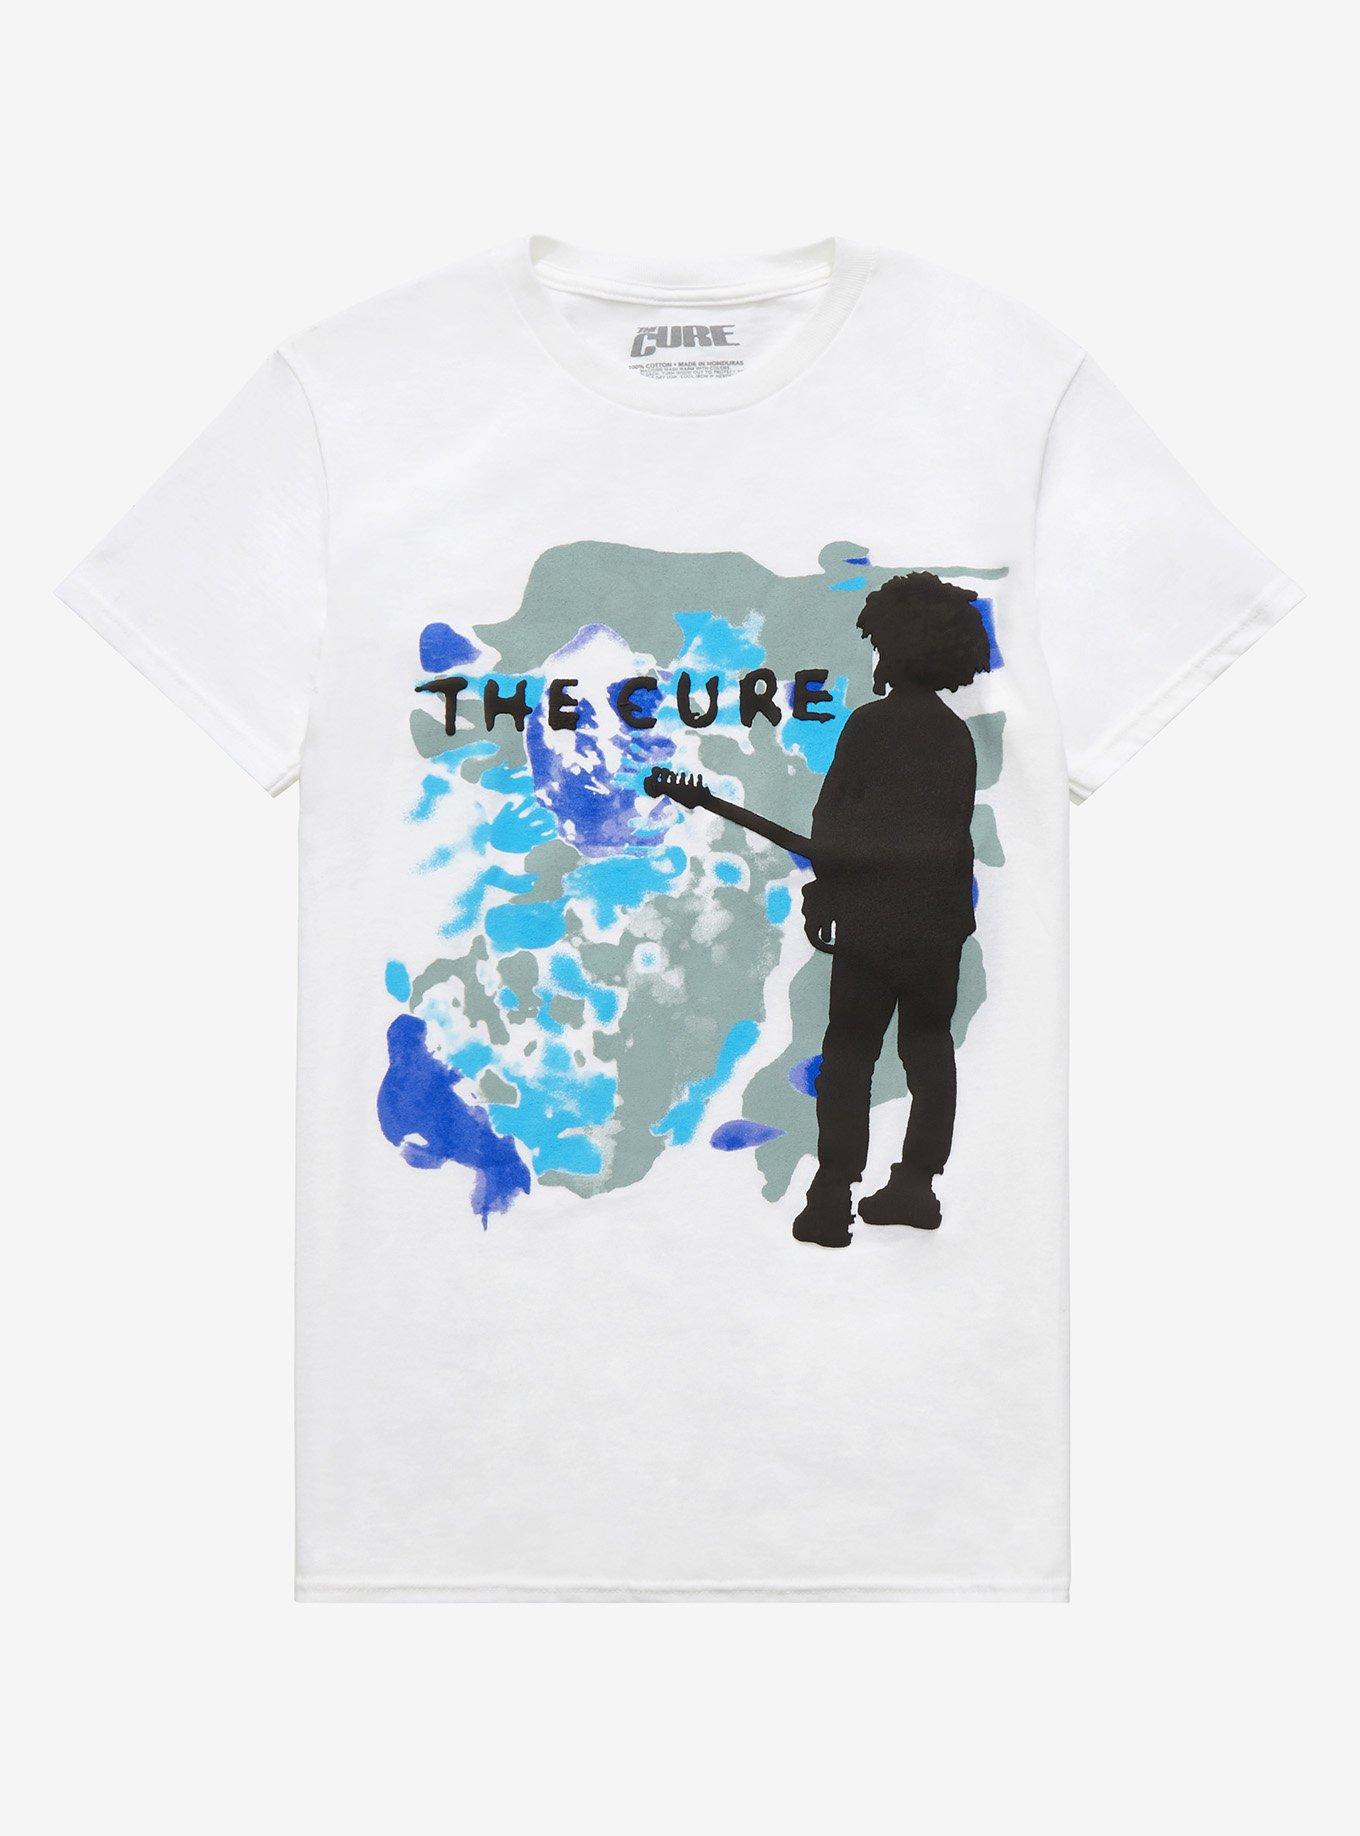 The Cure T-Shirts & Merchandise | Hot Topic